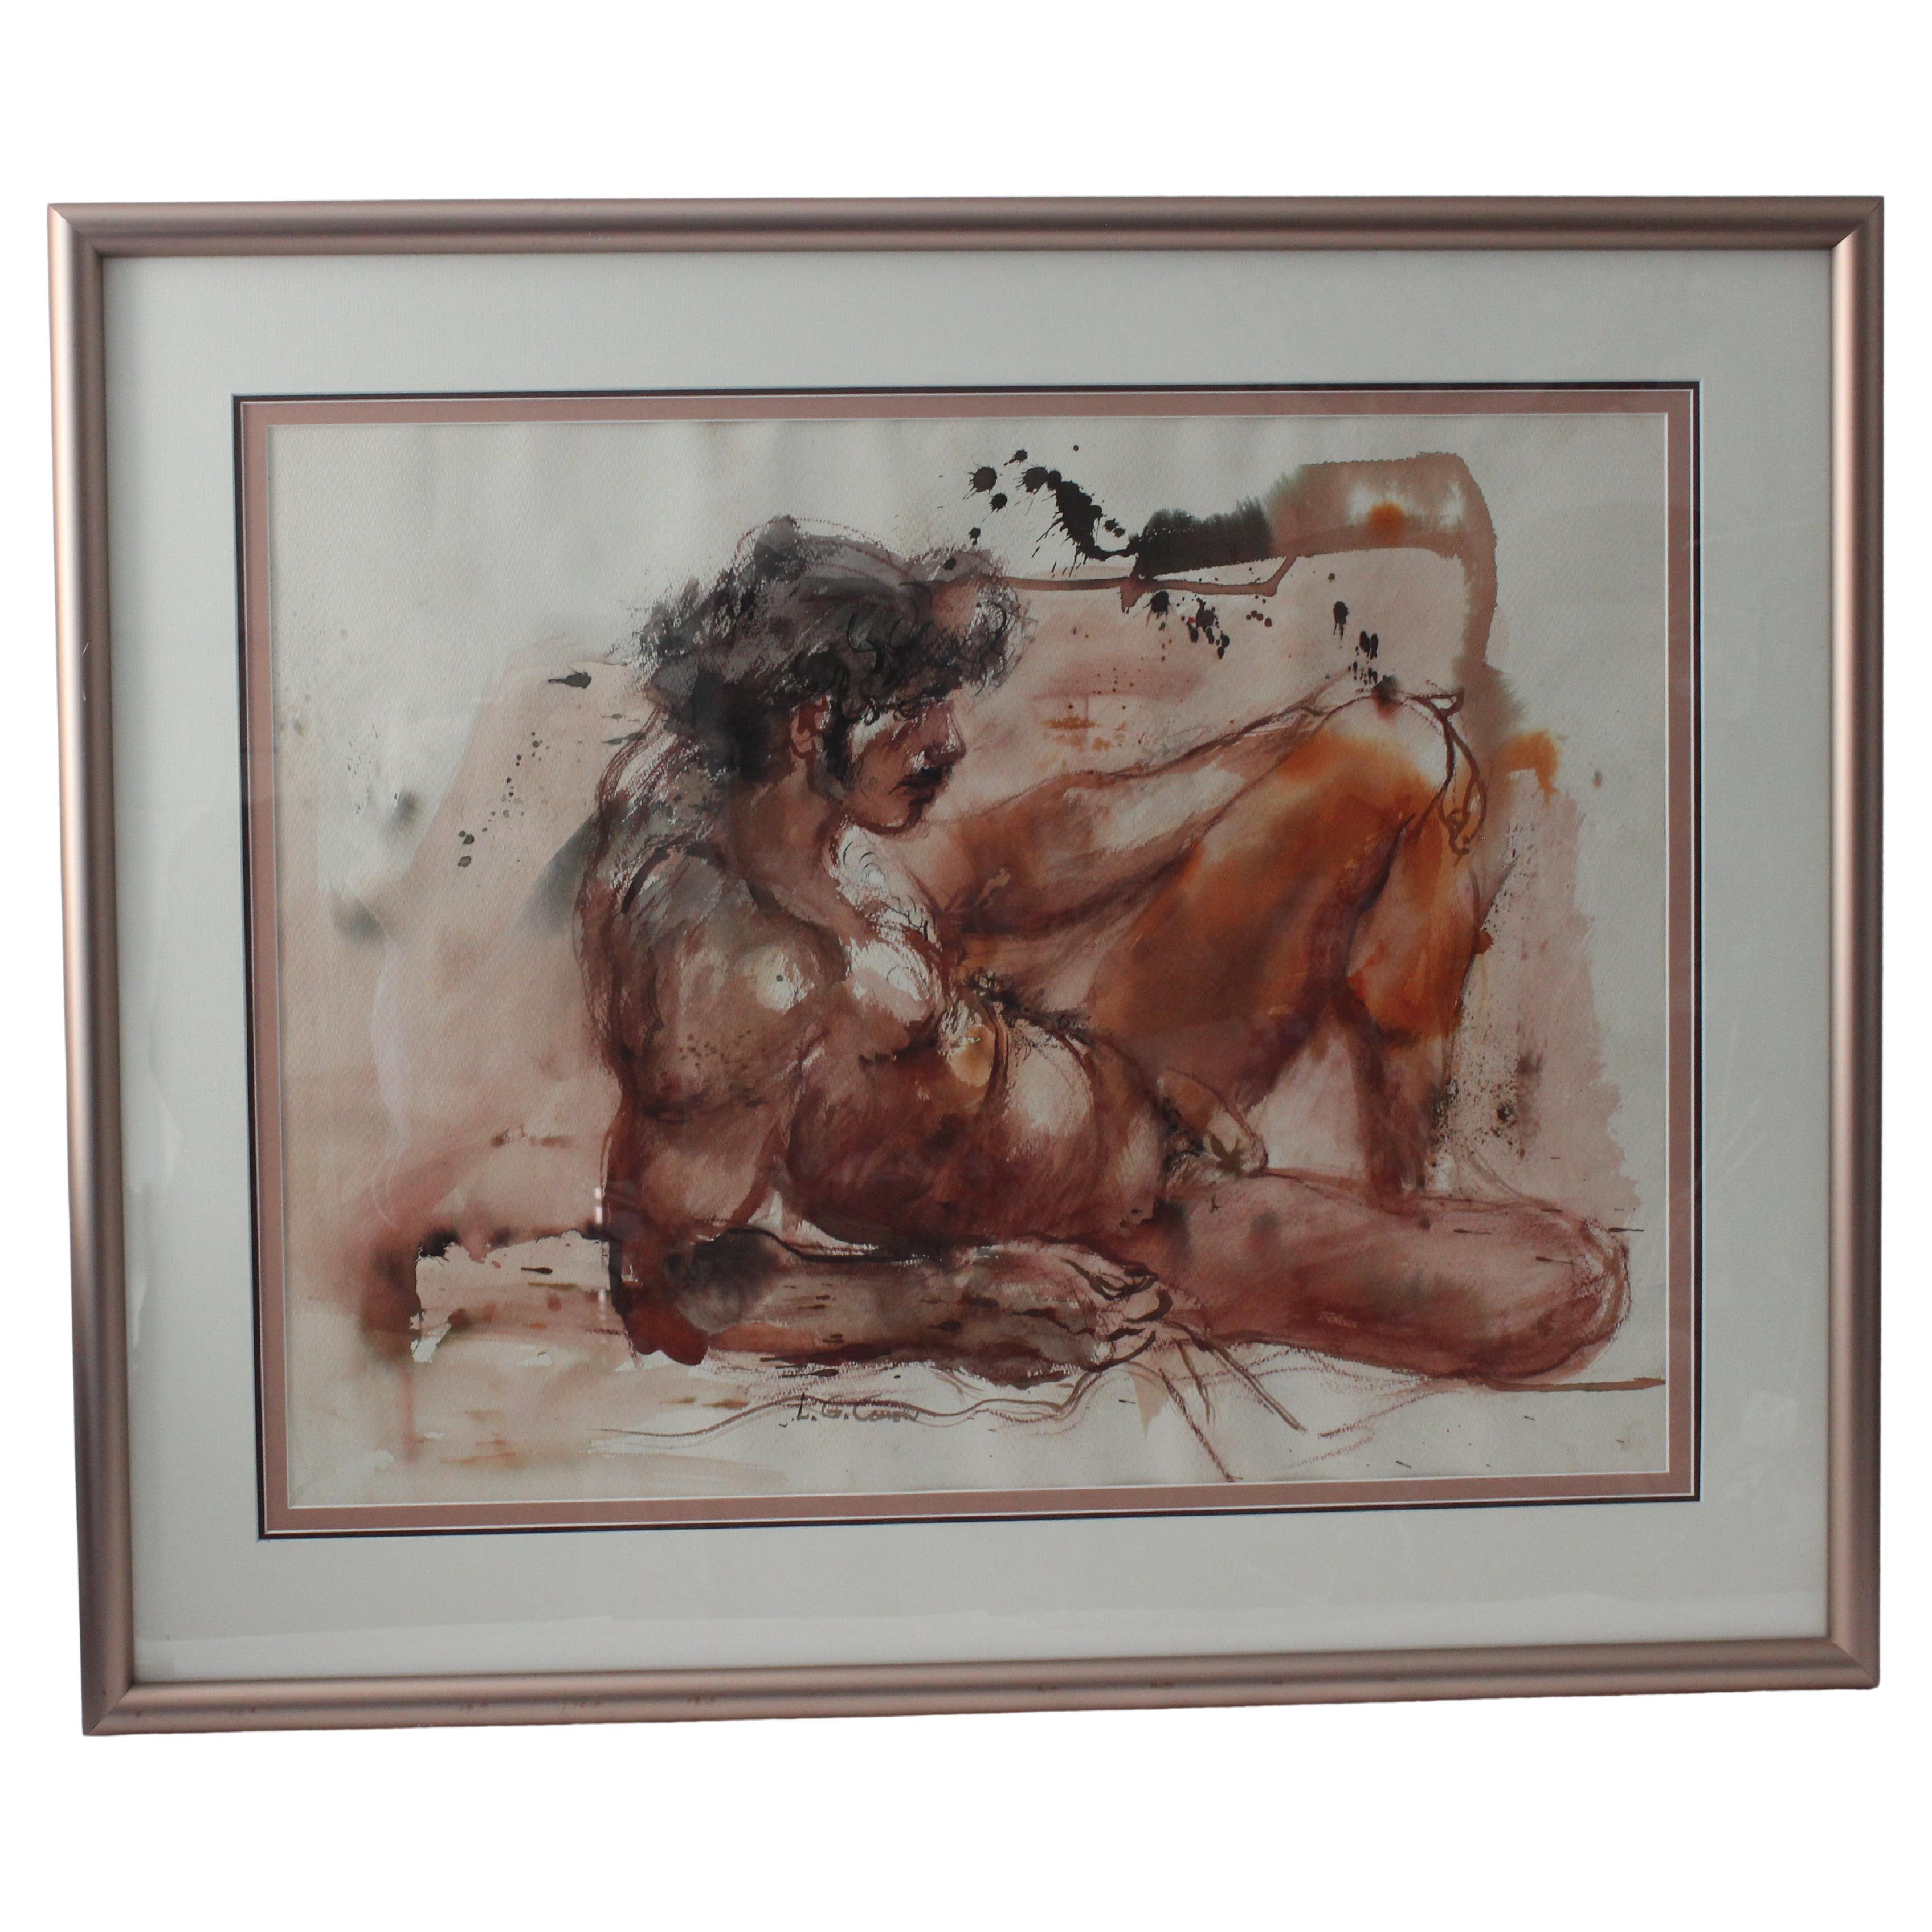 This moment in time captures the free spirit of the 1970s with this hand painted watercolor of a male nude signed by the artist.

Note: Overall Dimensions are 24.25